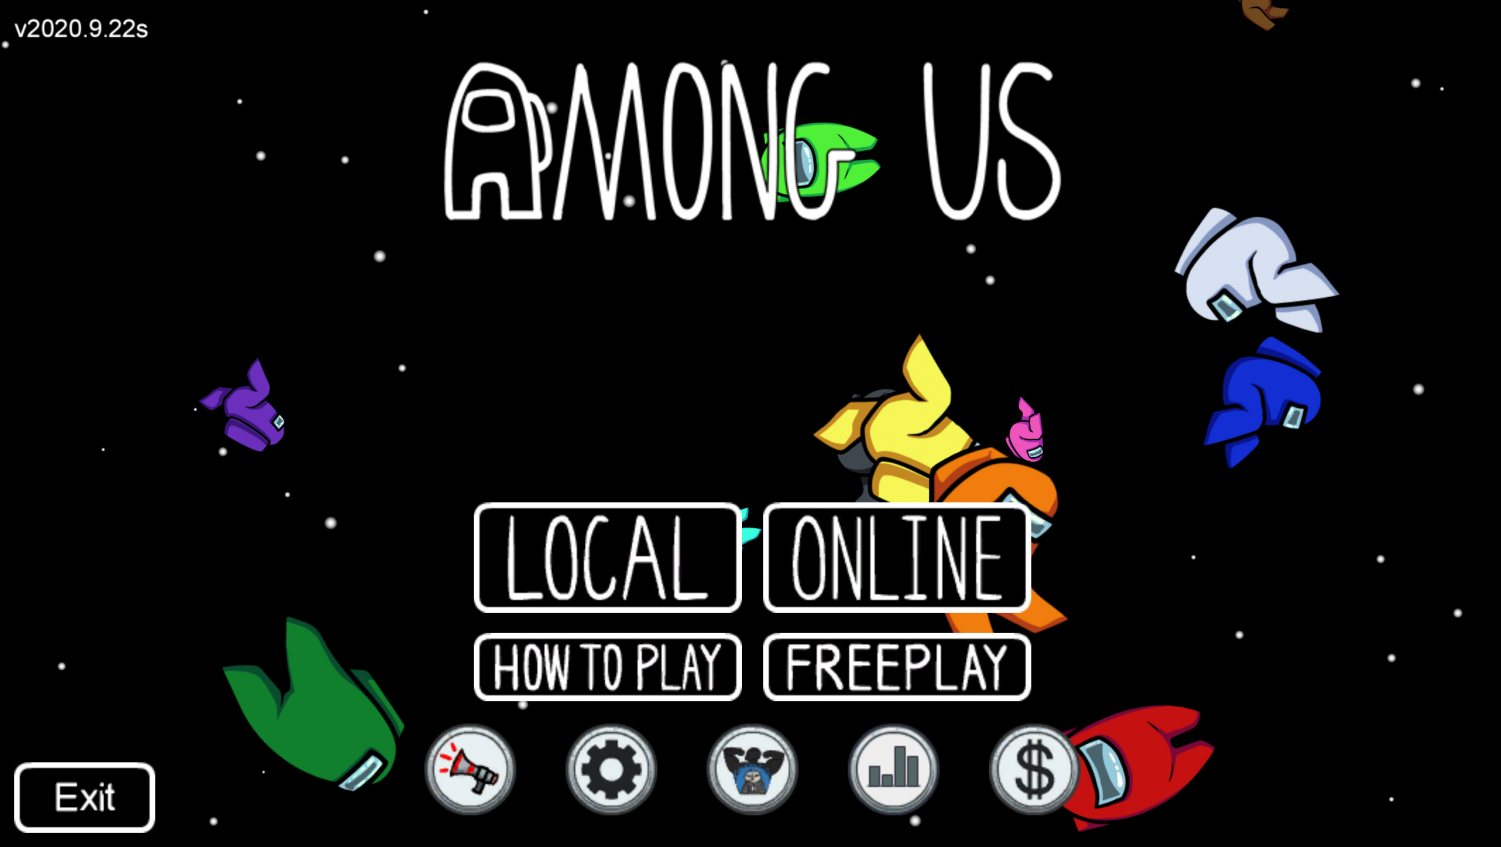 Among Us Online - Online Game - Play for Free